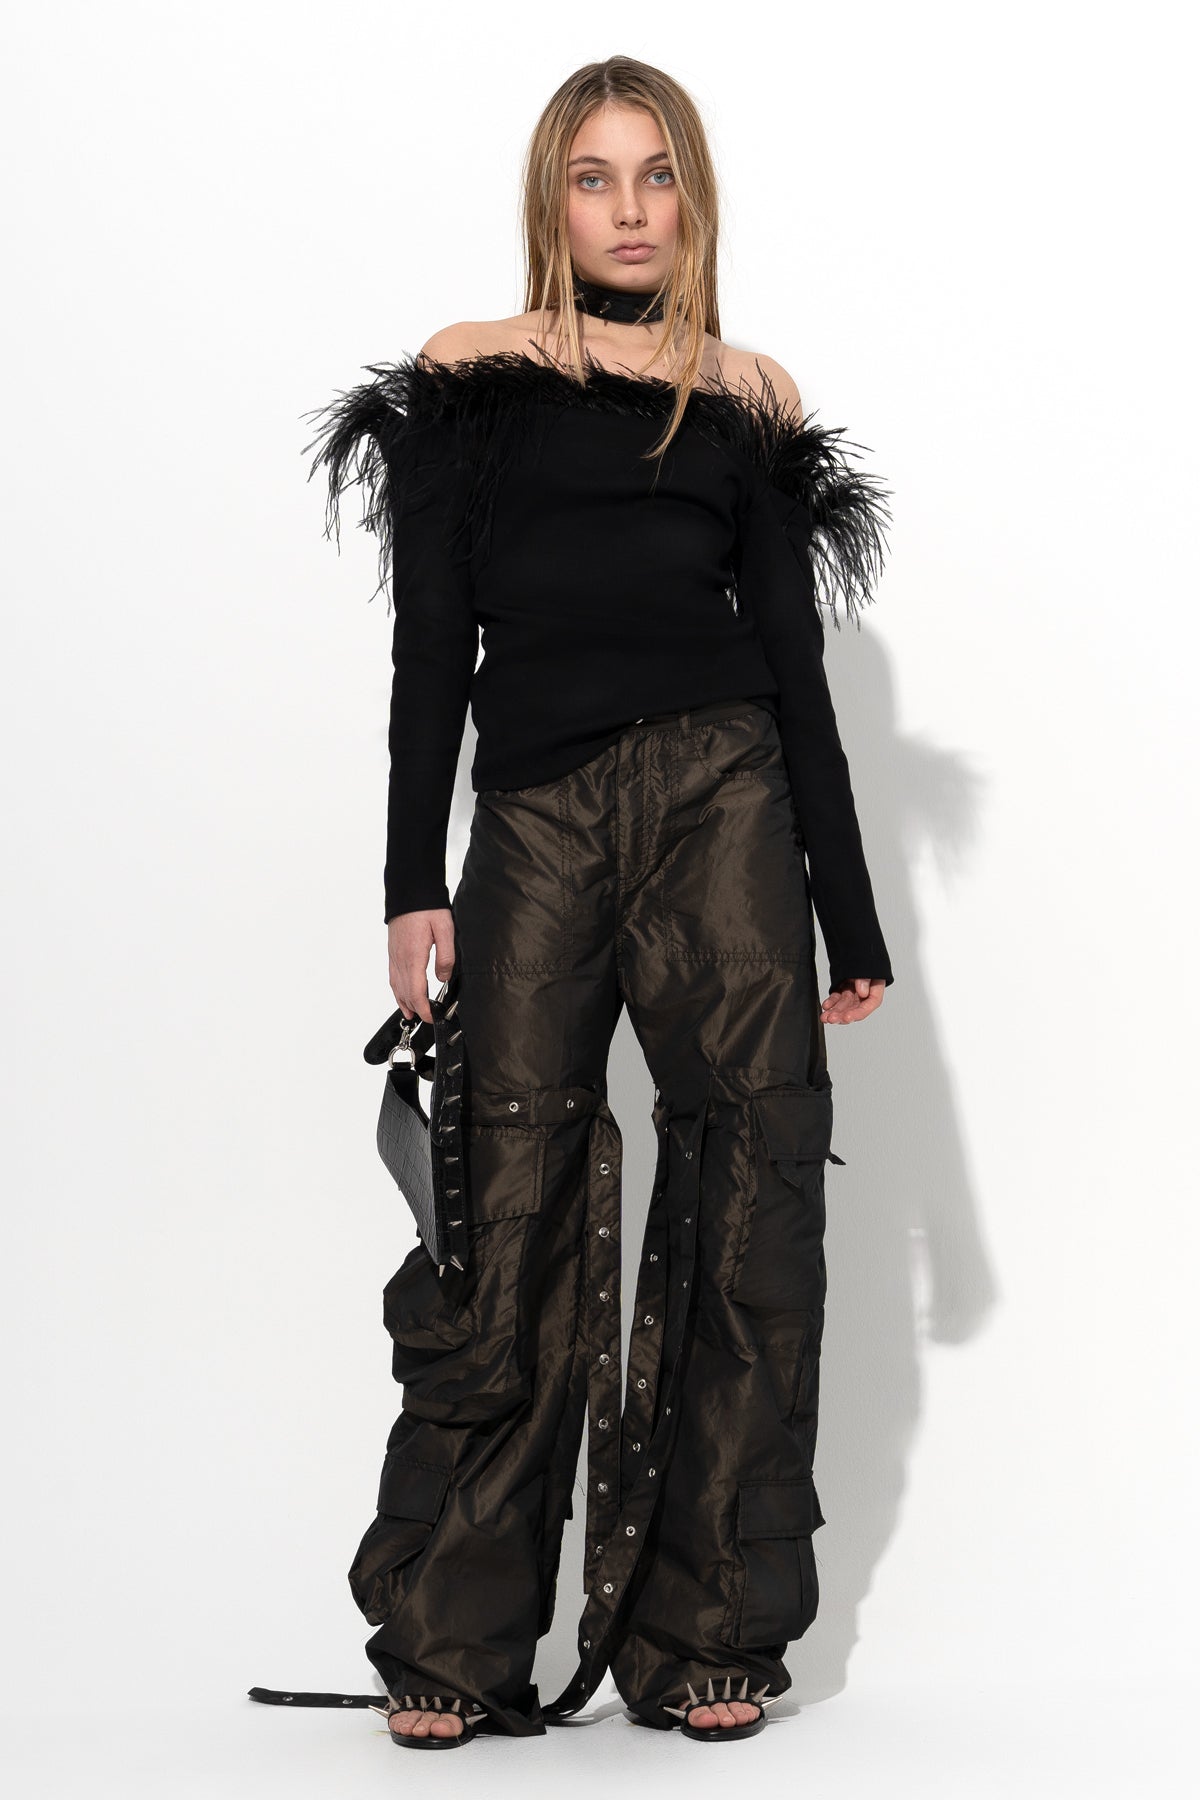 BLACK LONG SLEEVE TOP WITH FEATHERS marques almeida